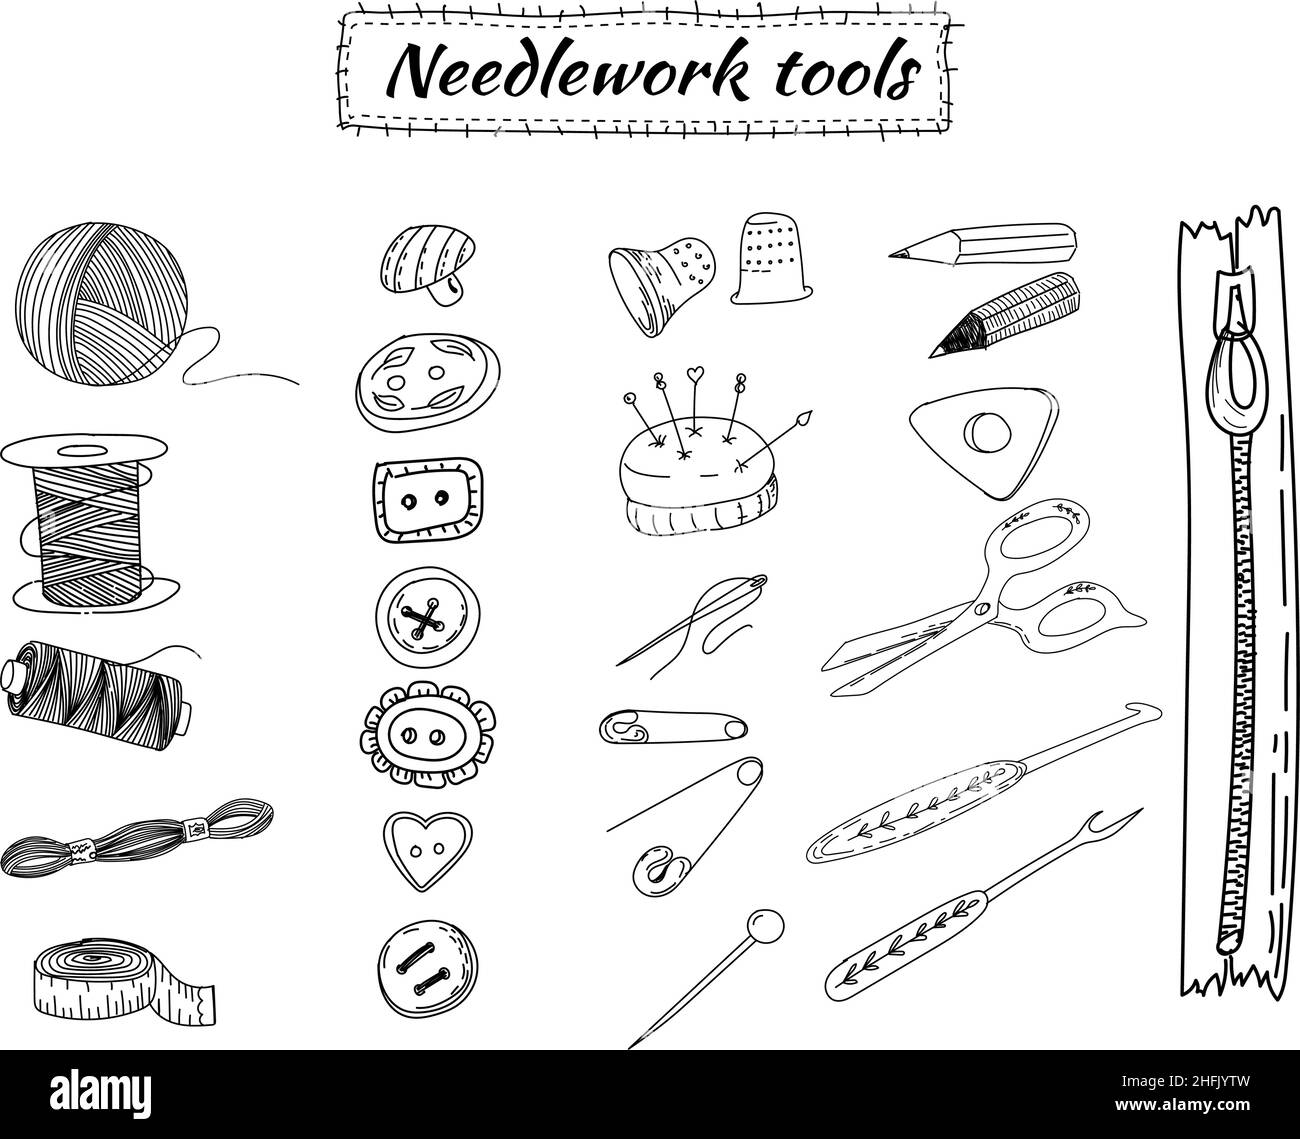 Tools and accessories for sewing and needlework. Scissors, twist, buttons, needles, pins, threads and spools of thread. Hand drawn vector doodle illus Stock Vector